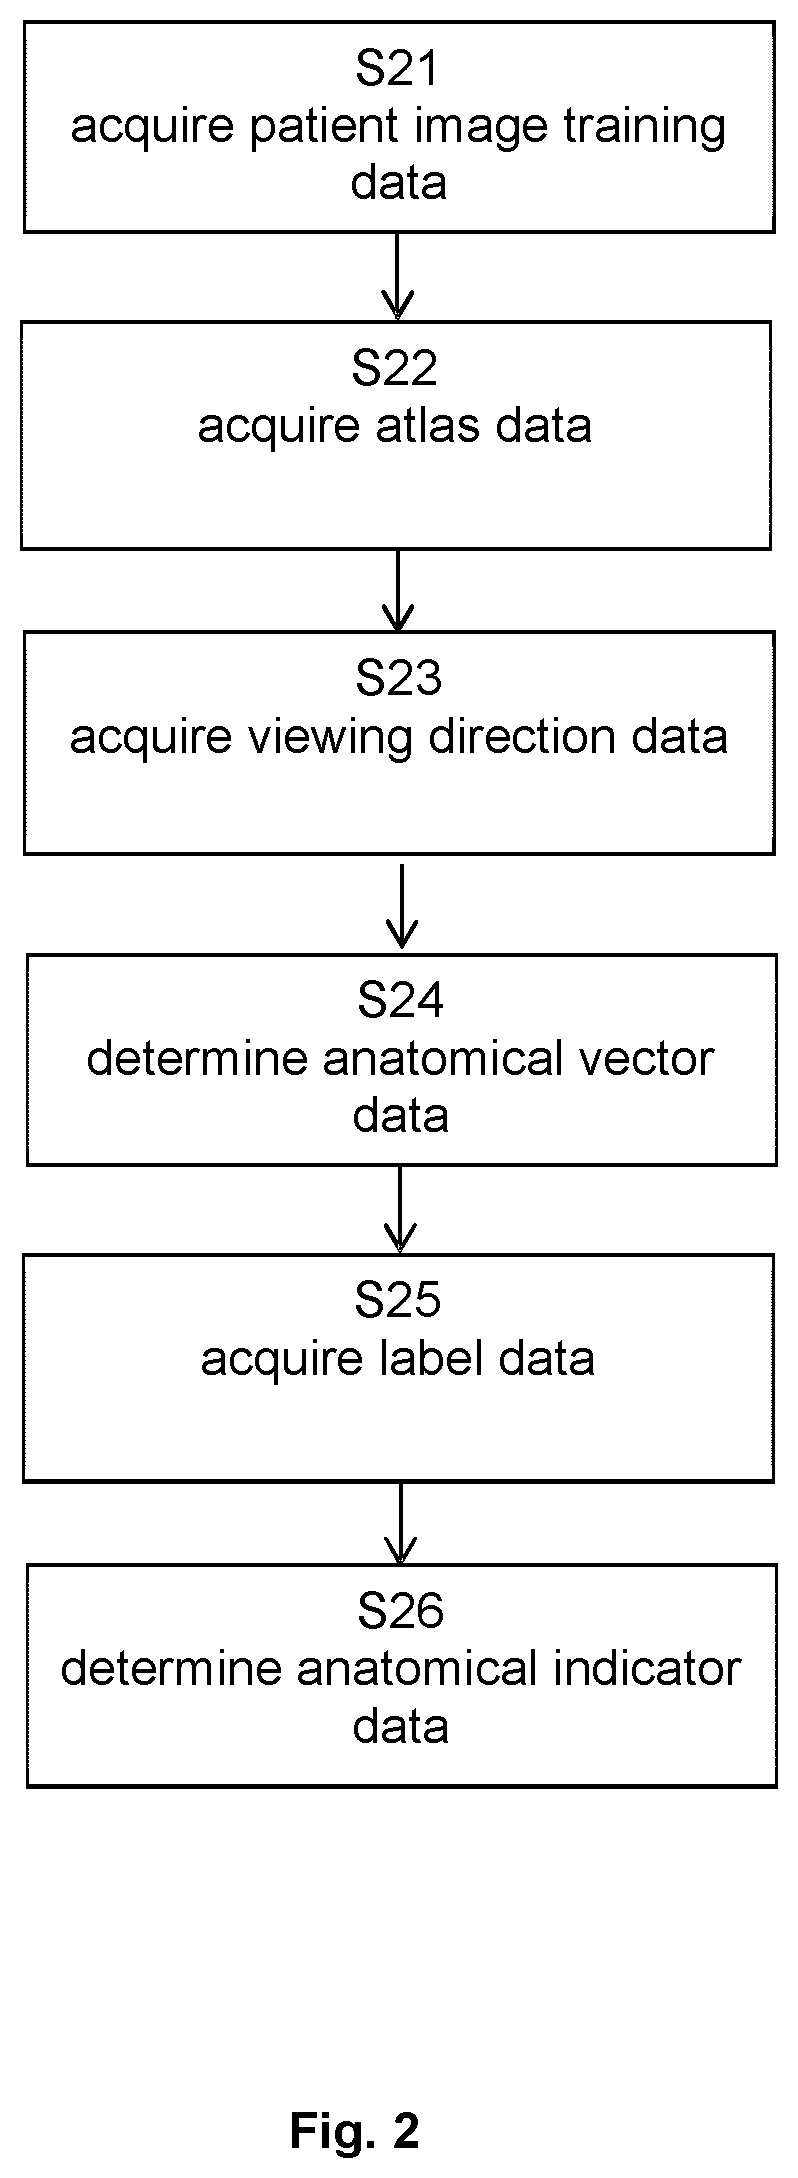 Medical image analysis using machine learning and an anatomical vector